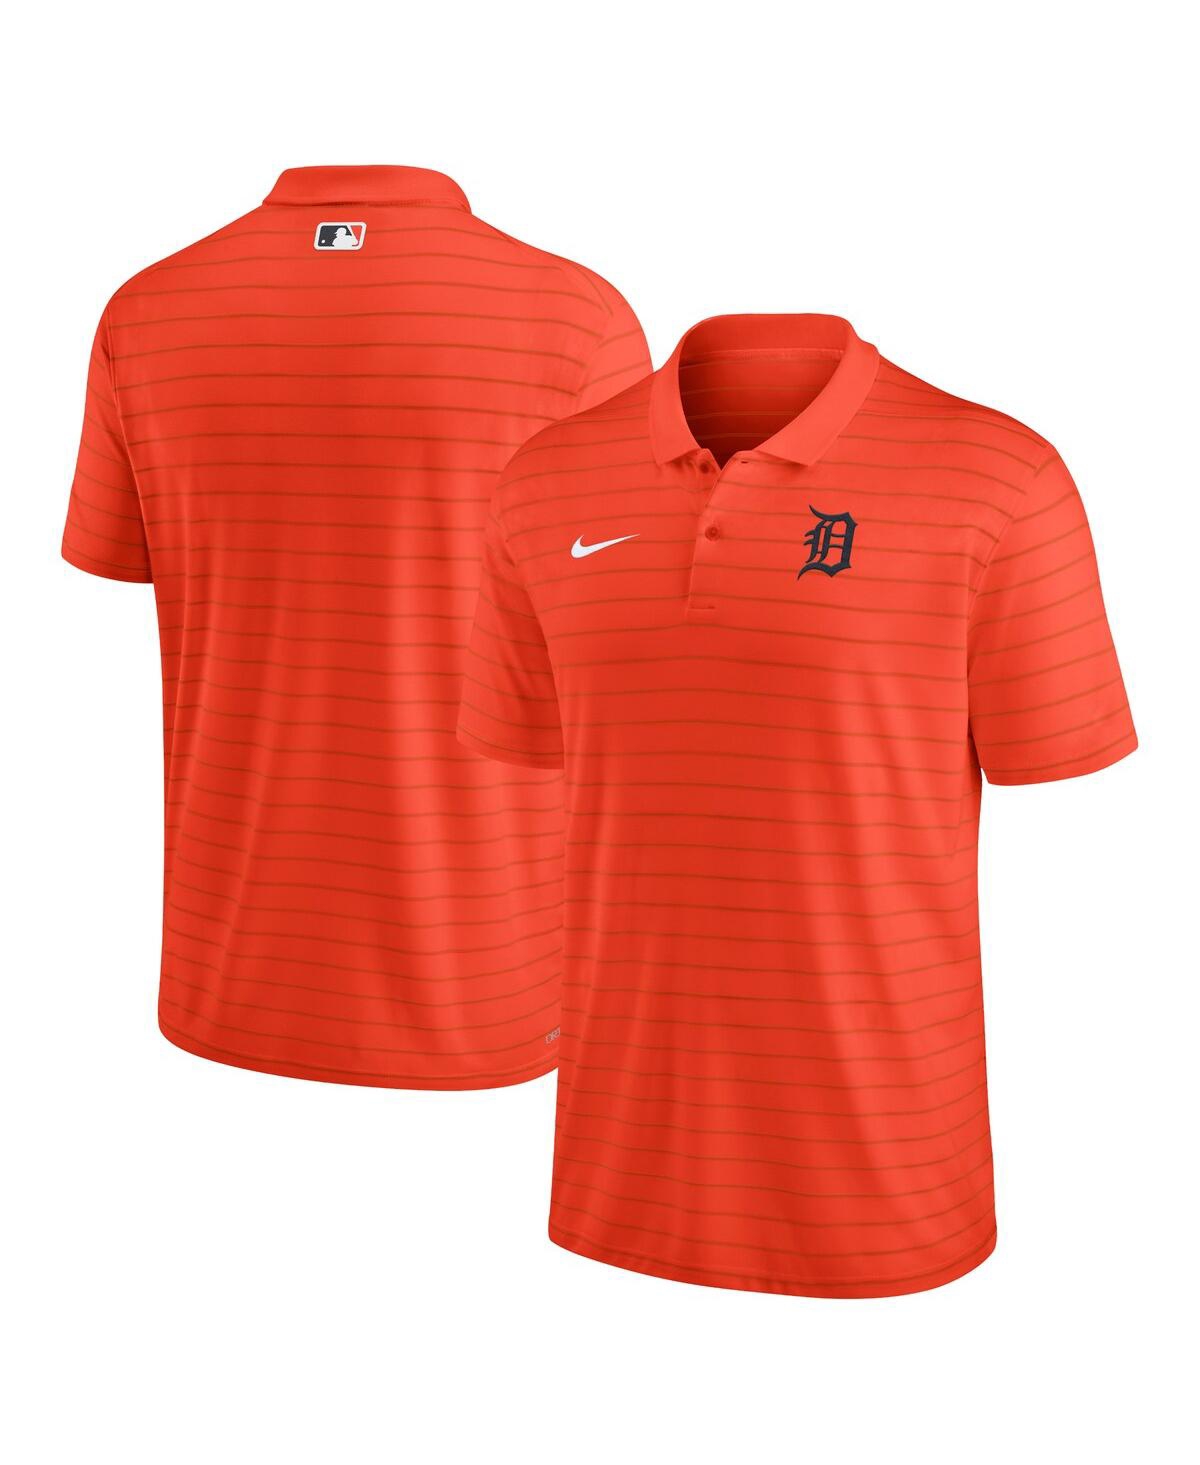 Nike Men's  Orange San Francisco Giants Authentic Collection Victory Striped Performance Polo Shirt